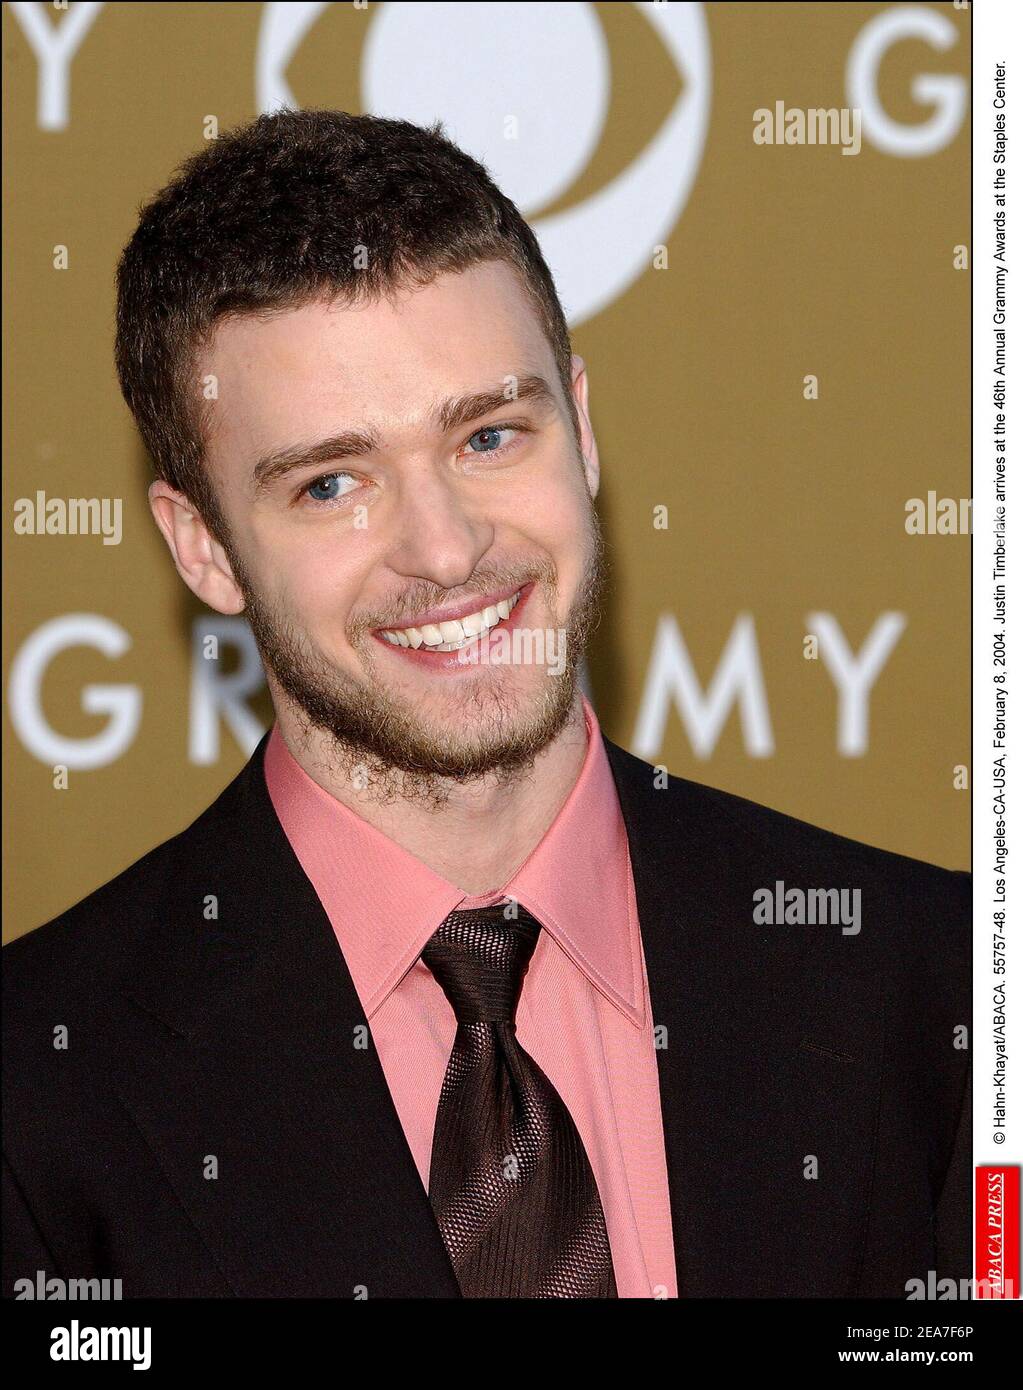 © Hahn-Khayat/ABACA. 55757-48. Los Angeles-CA-USA, February 8, 2004. Justin Timberlake arrives at the 46th Annual Grammy Awards at the Staples Center. Stock Photo